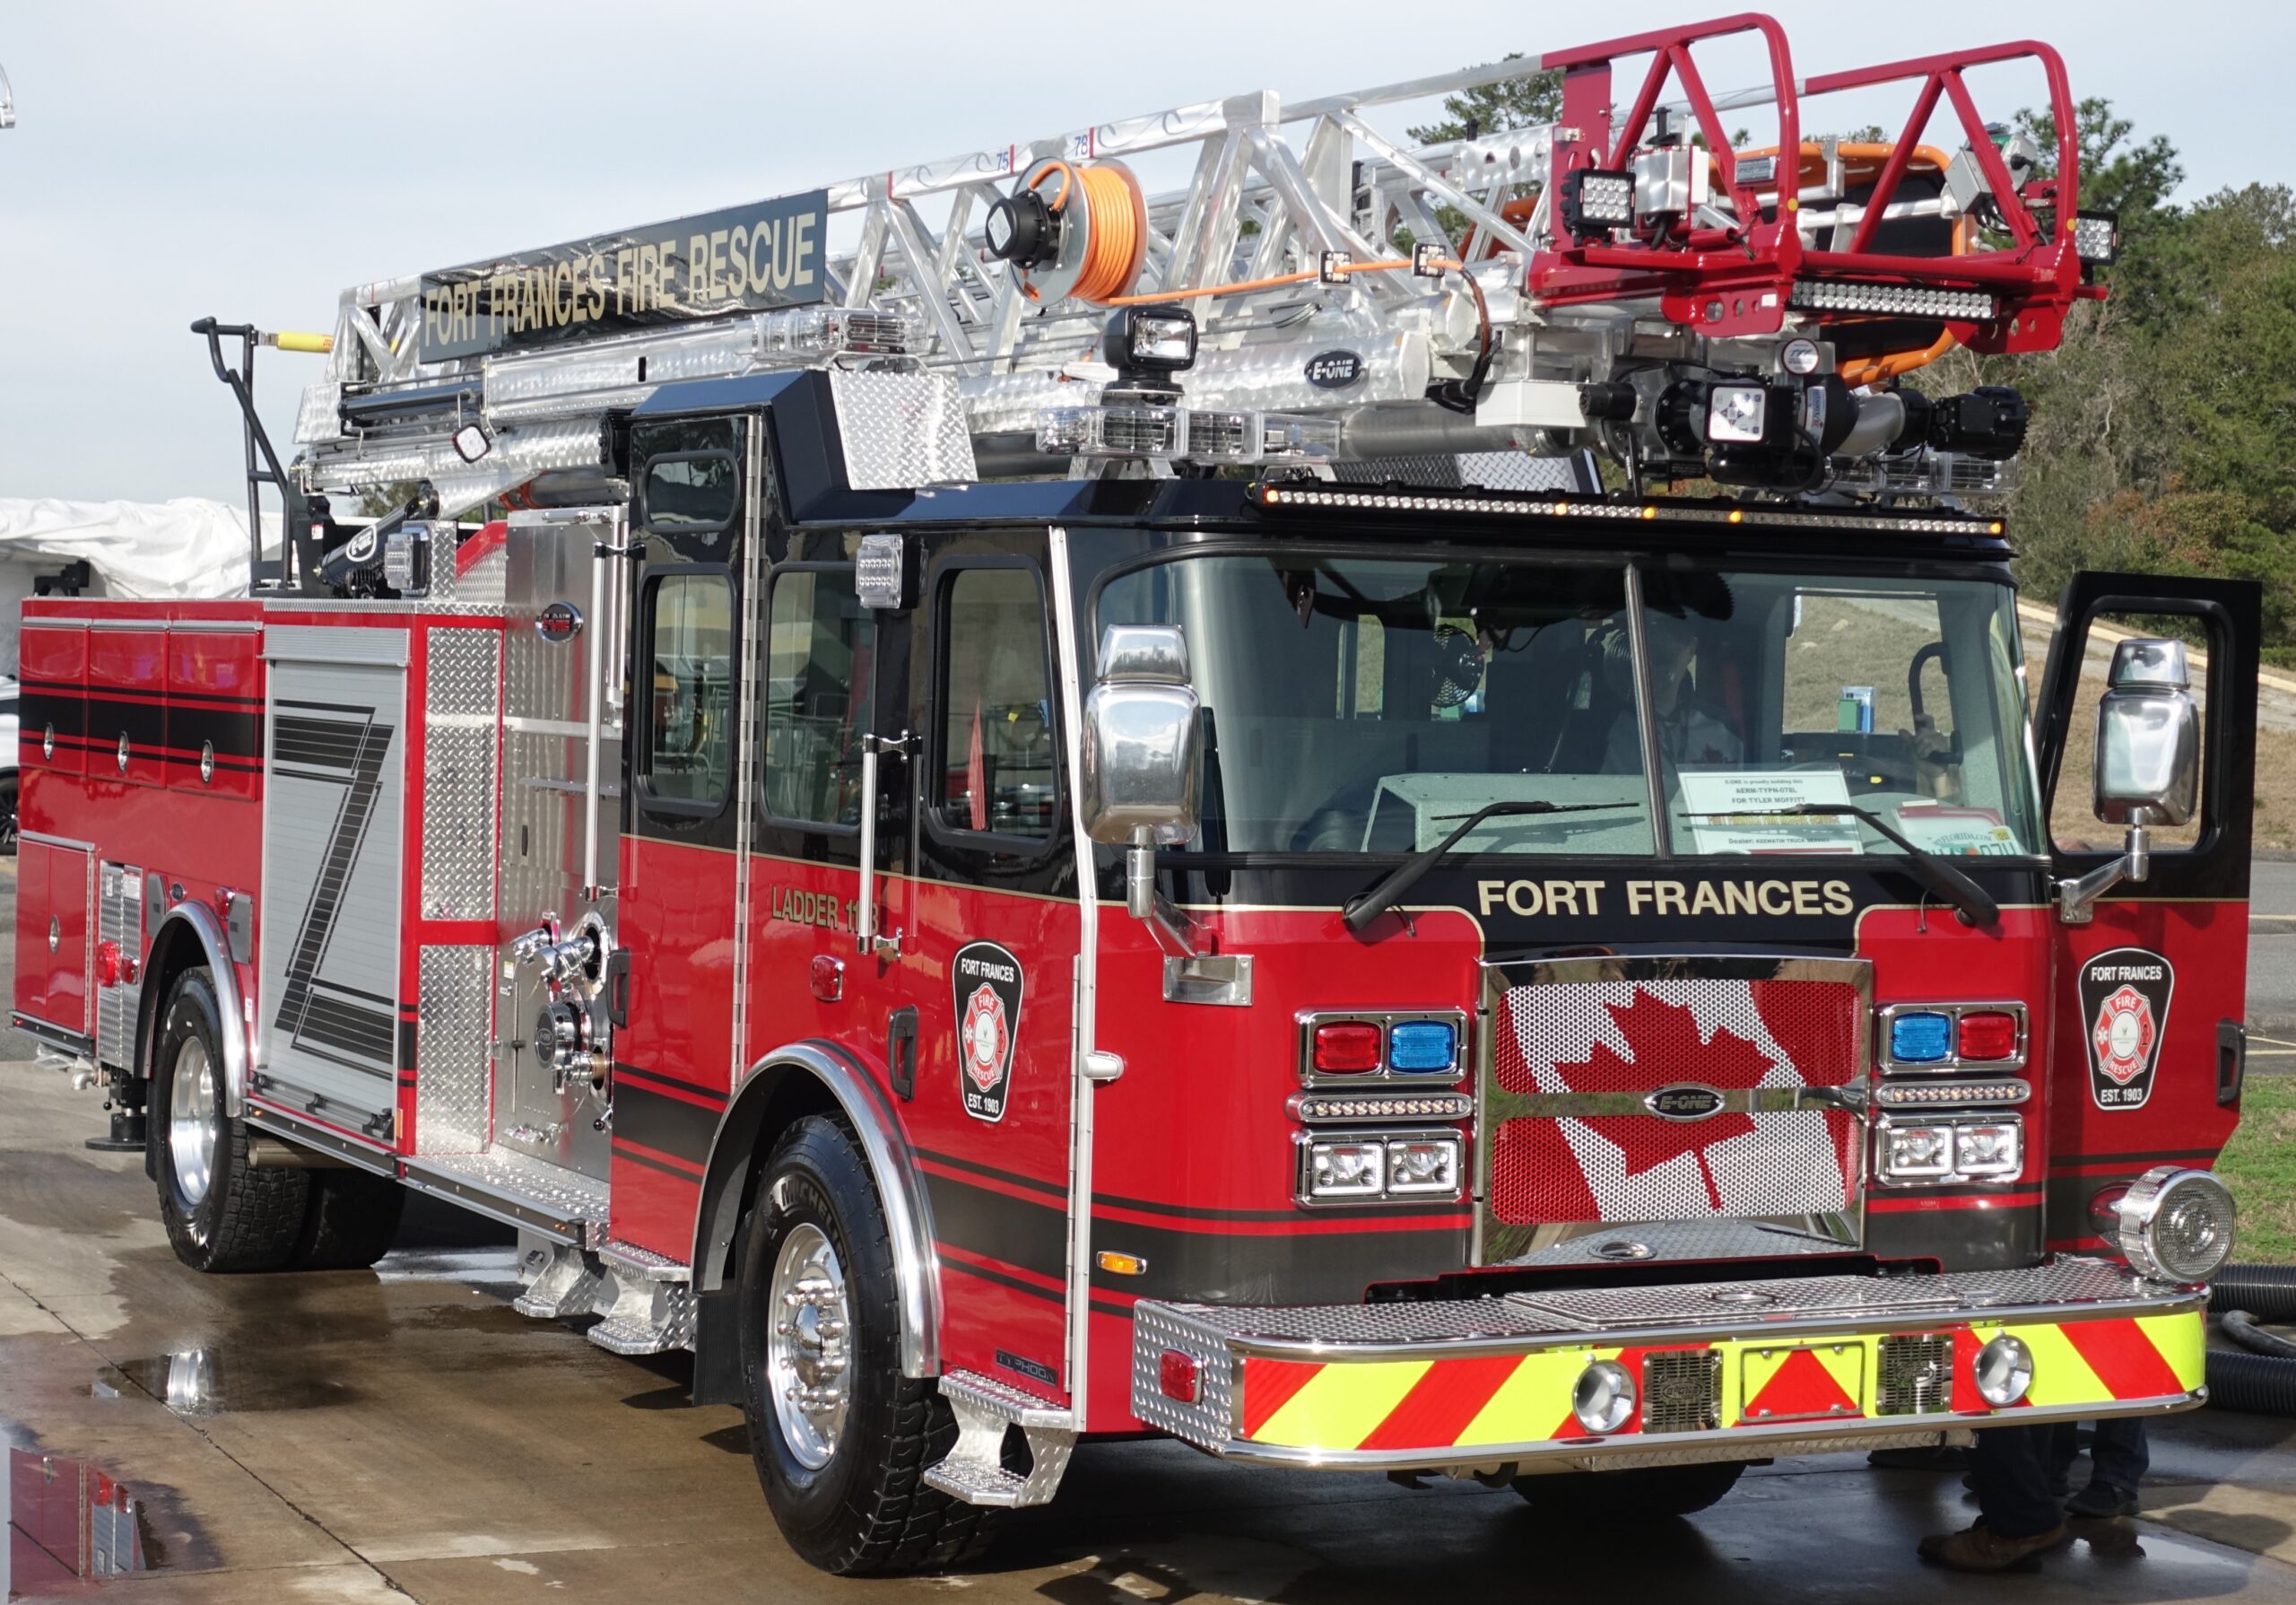 Town of Fort Frances receives new, long-awaited Aerial Ladder Truck